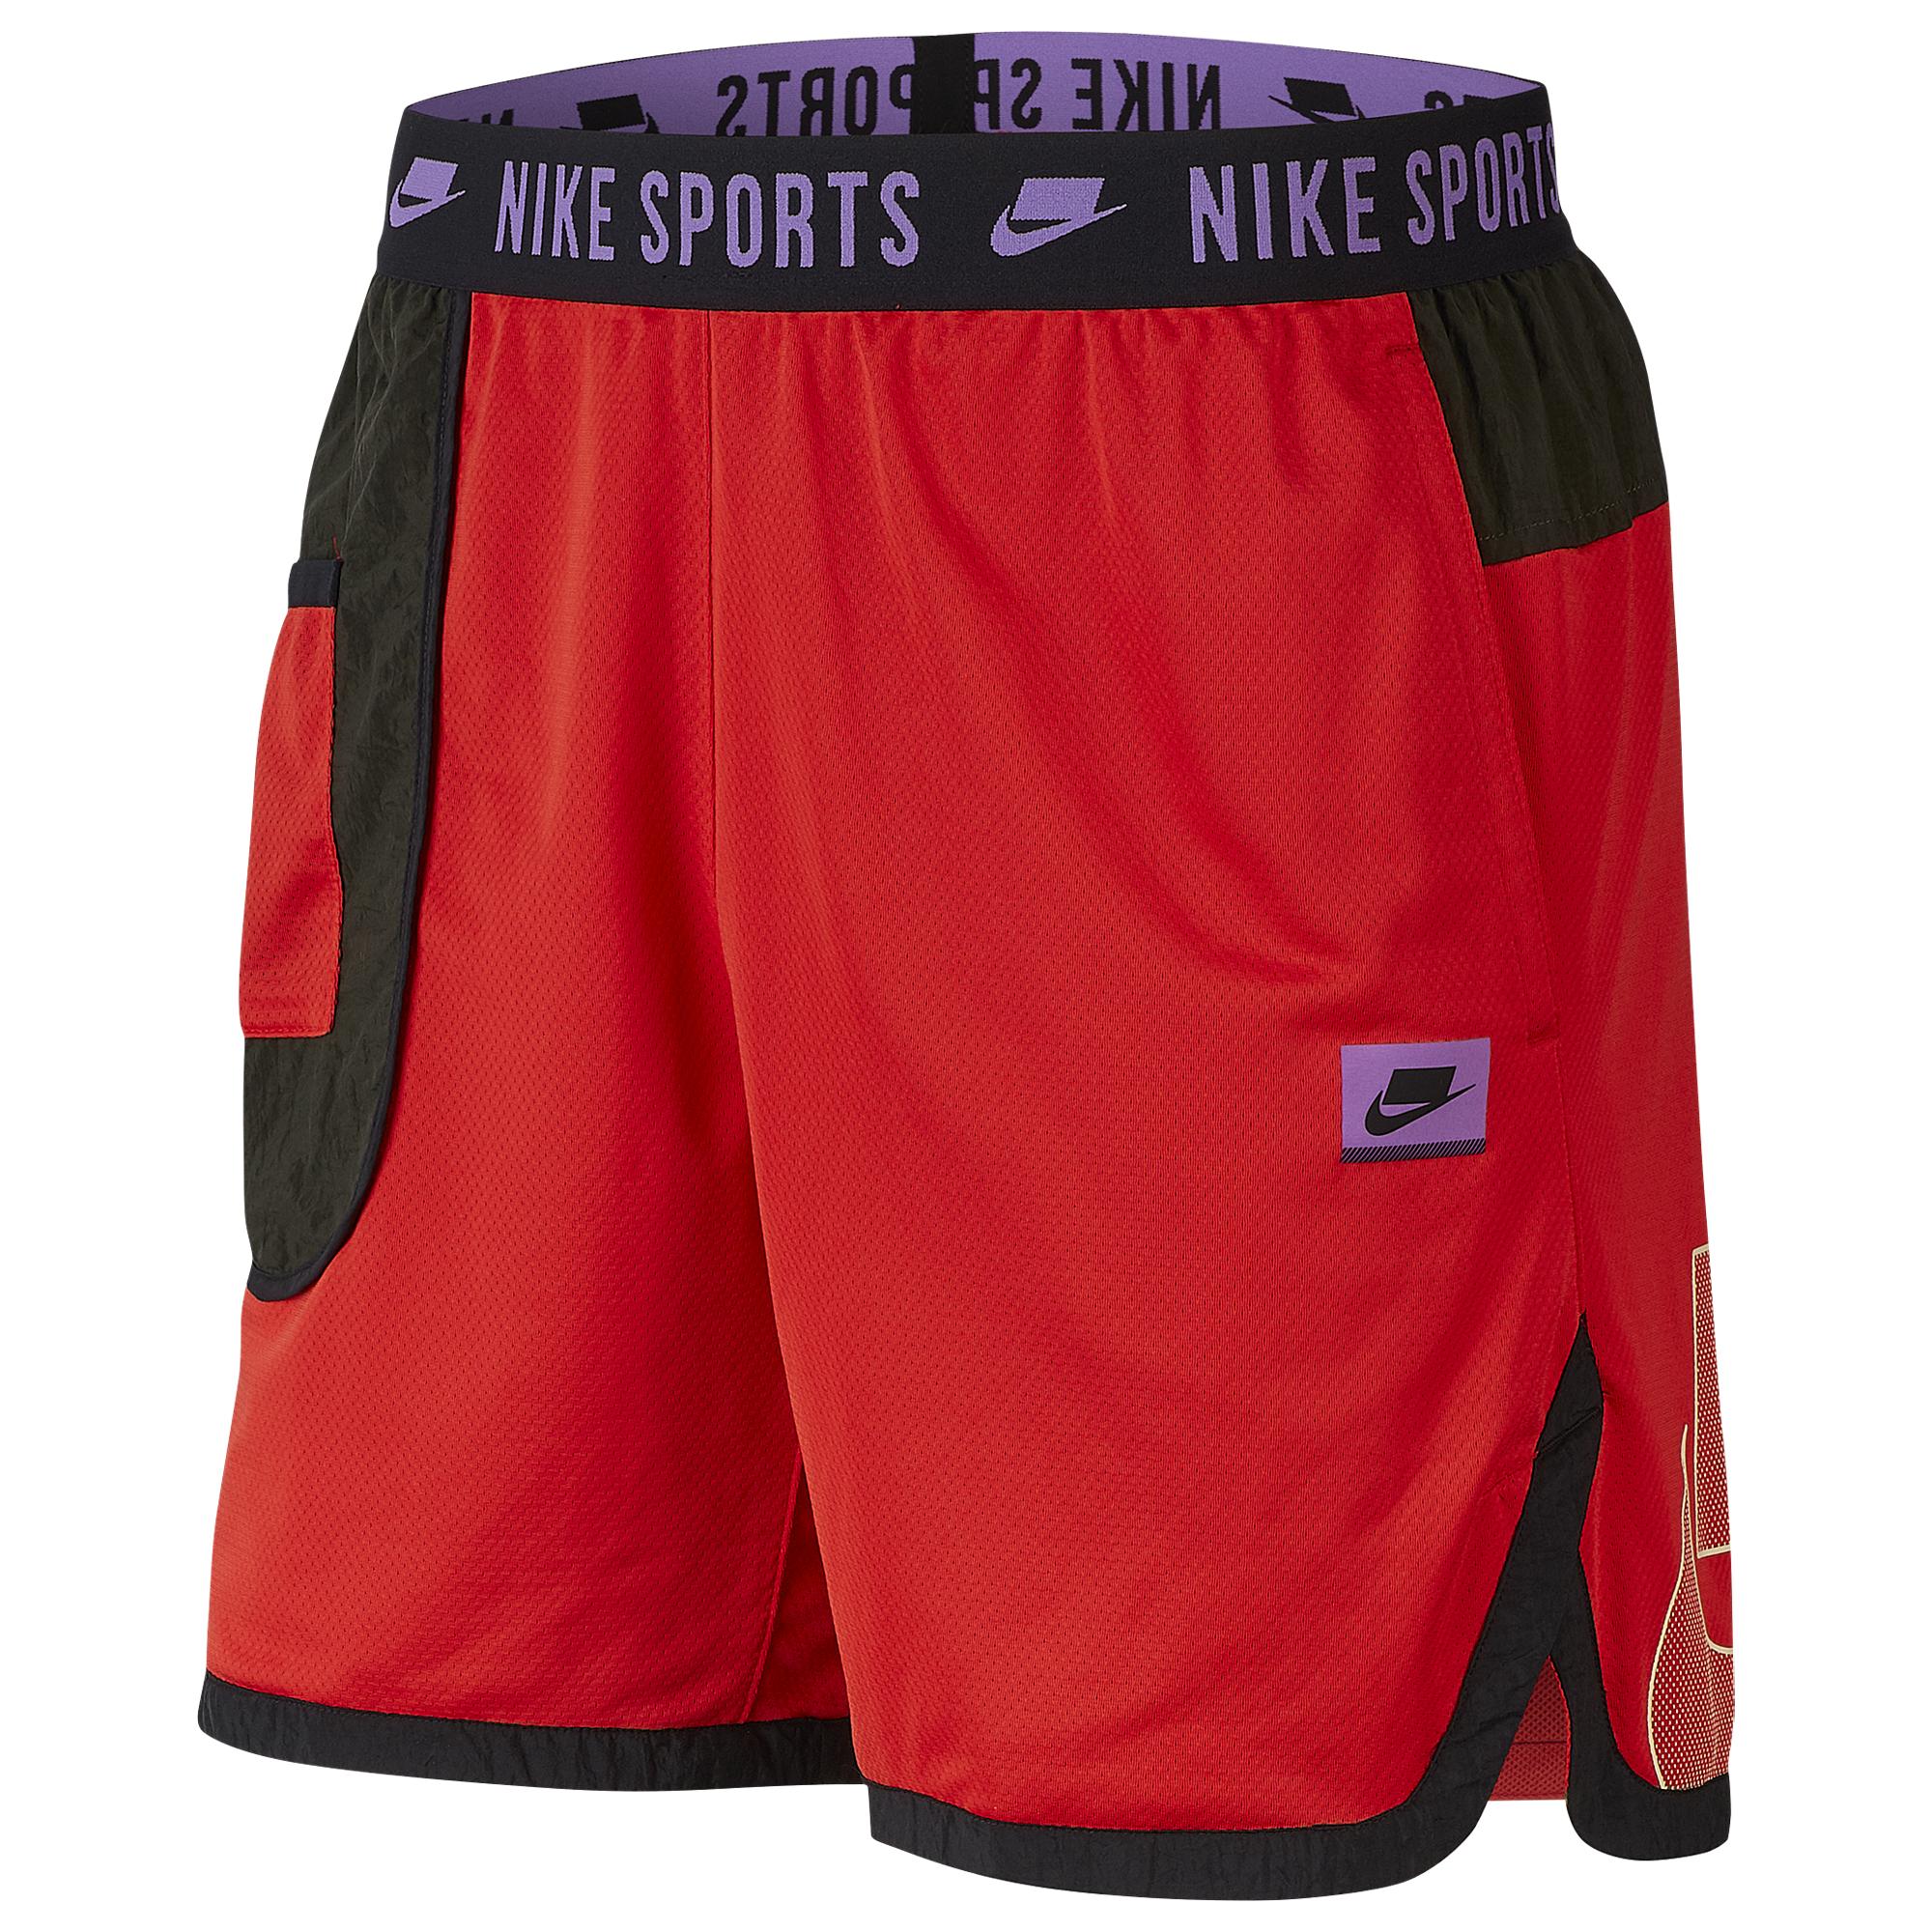 Nike Synthetic Dry Nsp Shorts in Red 